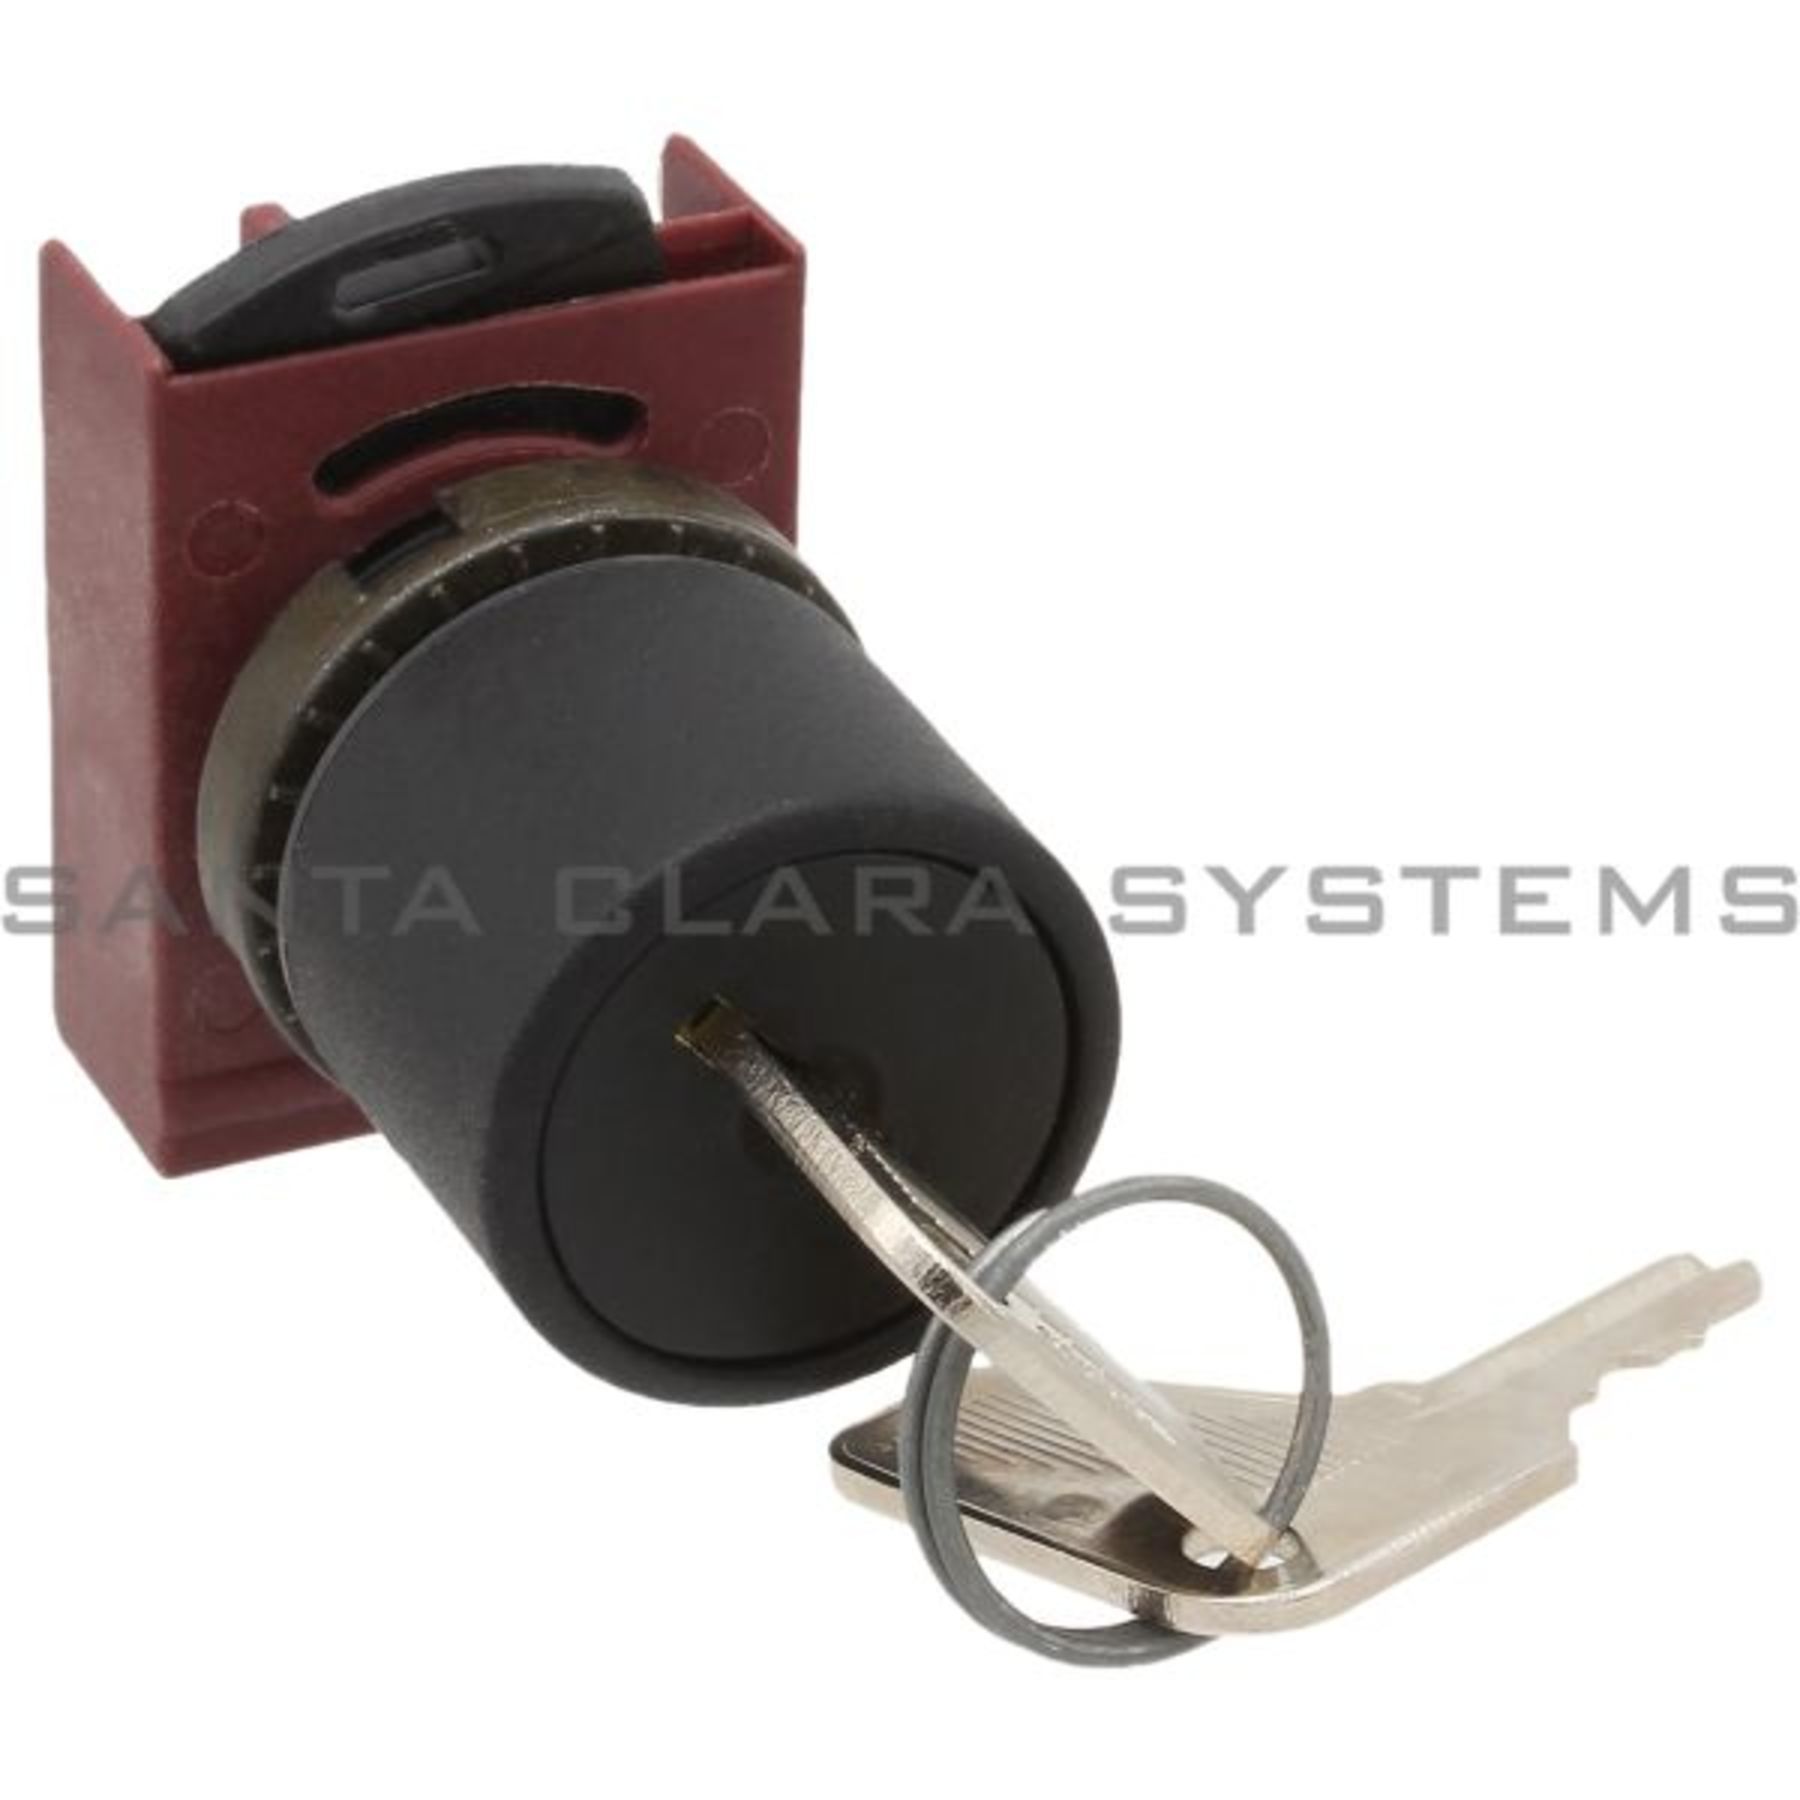 P9xscd0a95 Key Operated Selector Switch General Electric In Stock Santa Clara Systems